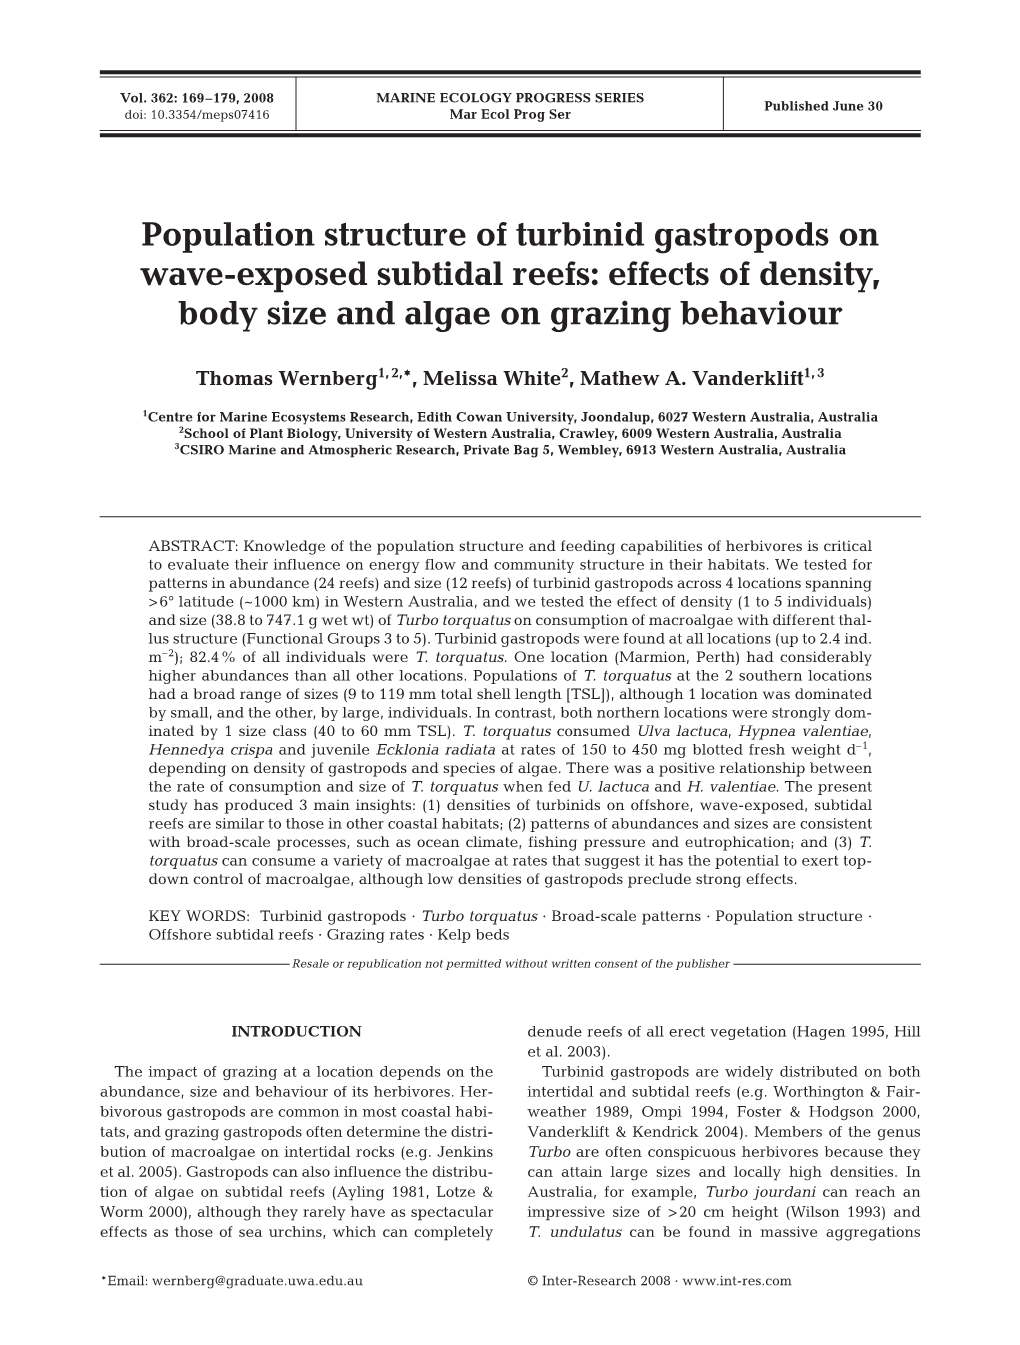 Population Structure of Turbinid Gastropods on Wave-Exposed Subtidal Reefs: Effects of Density, Body Size and Algae on Grazing Behaviour